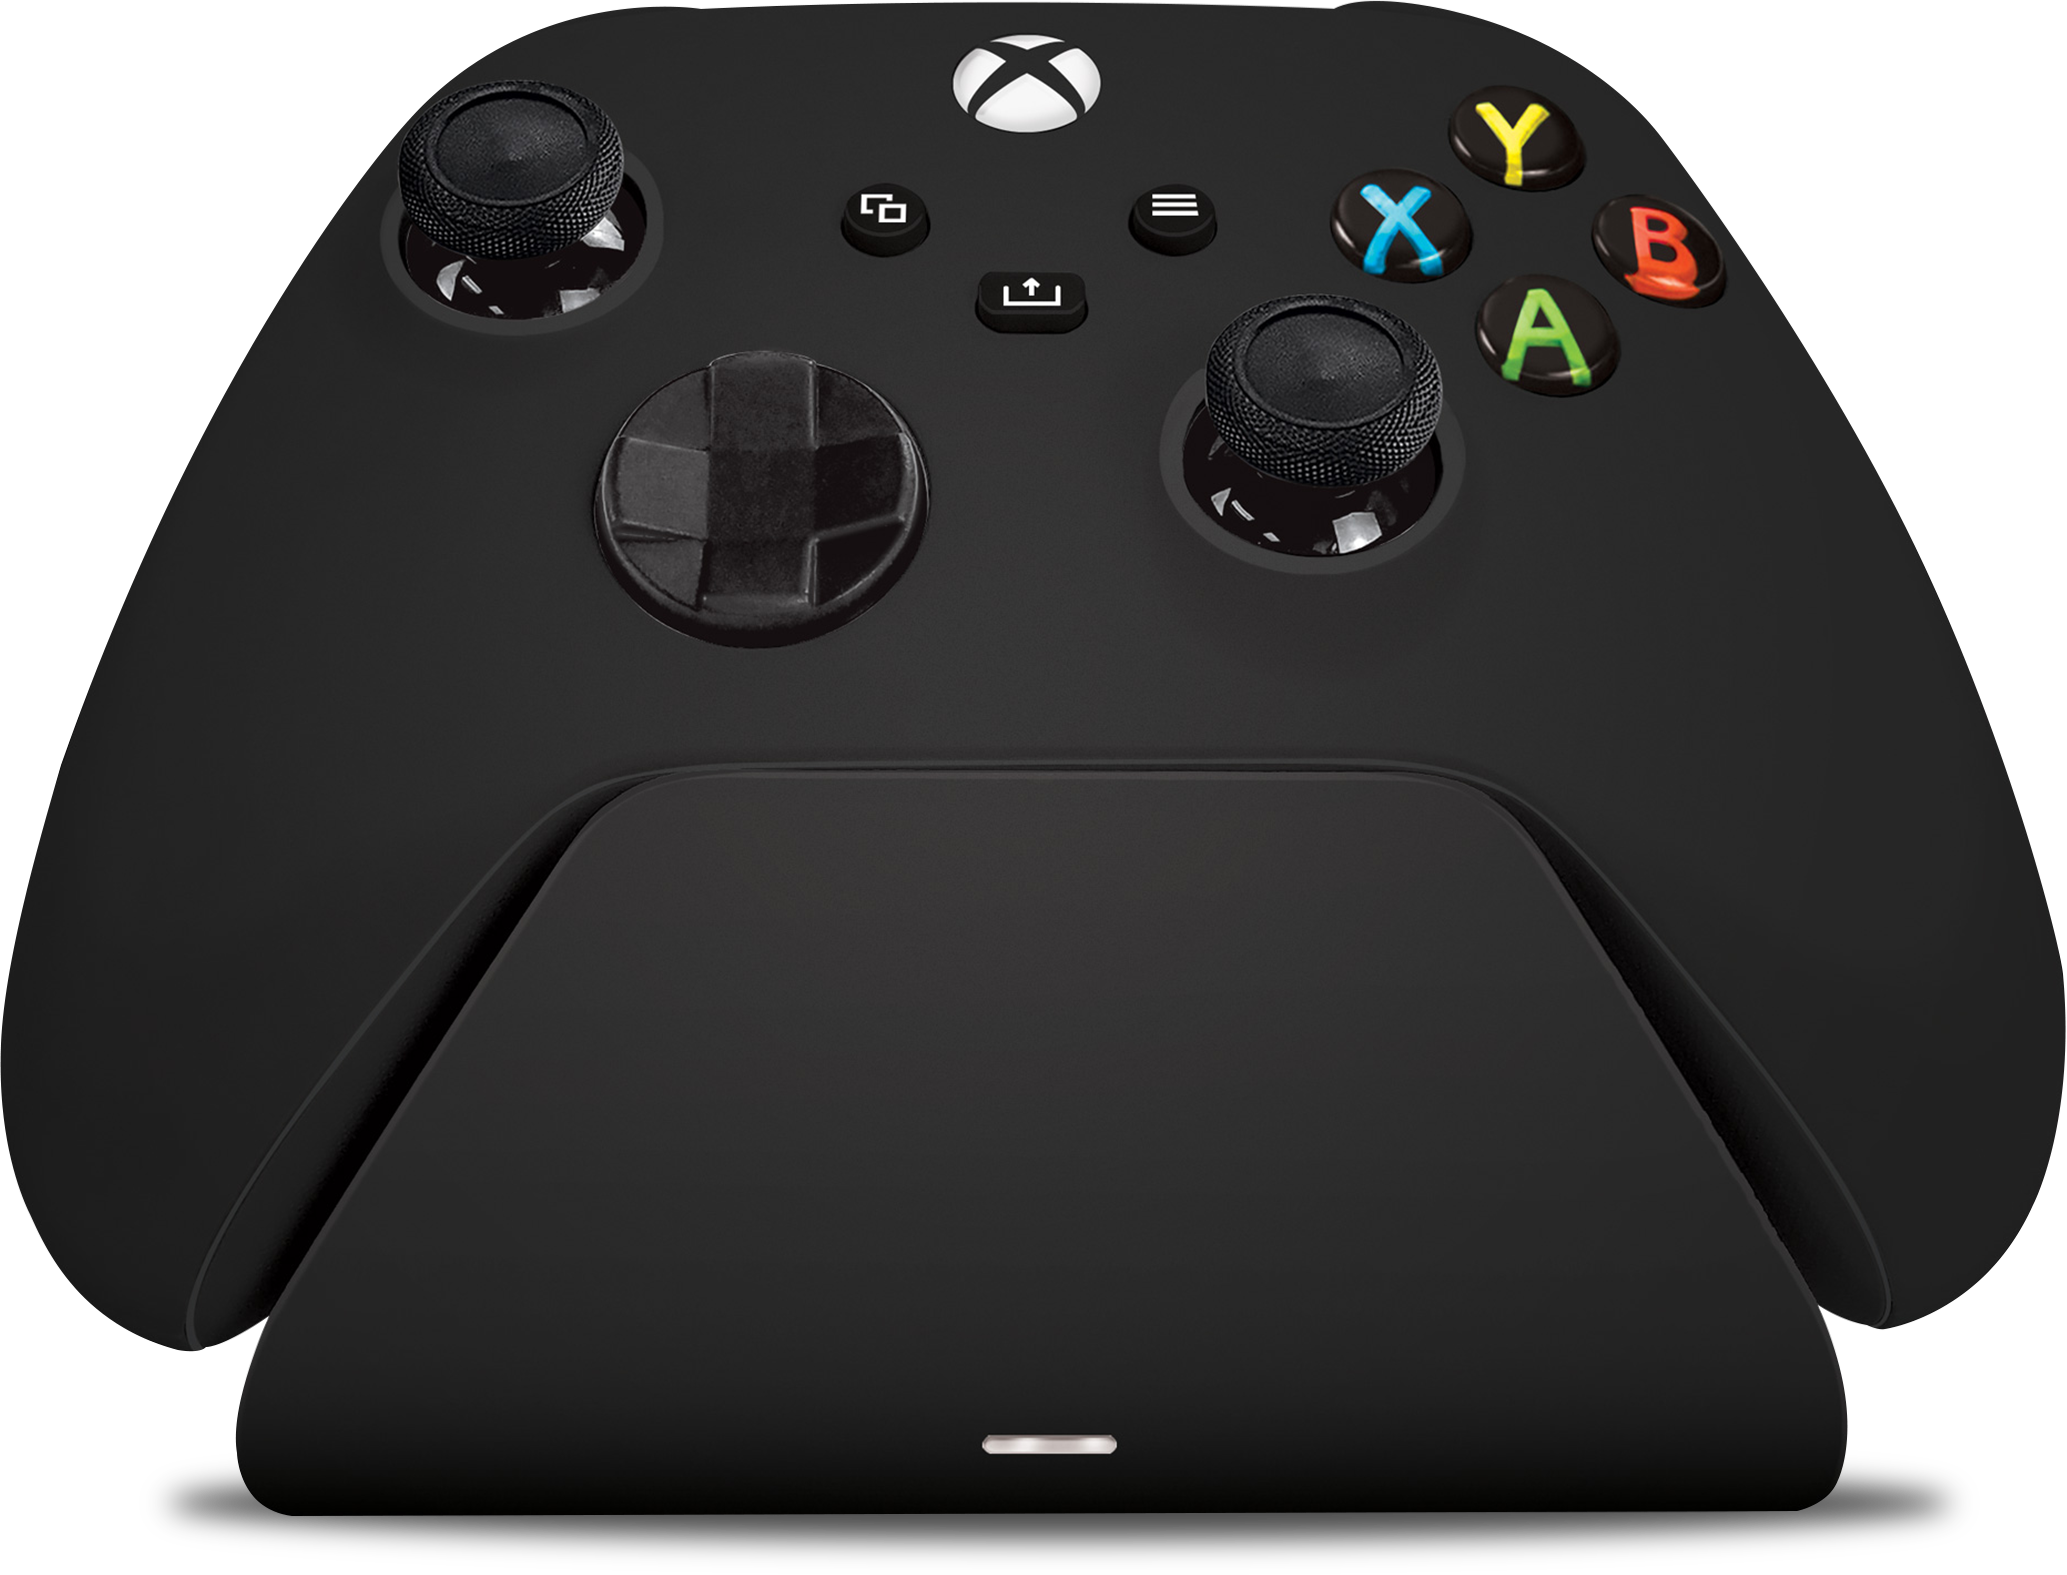 microsoft xbox official site